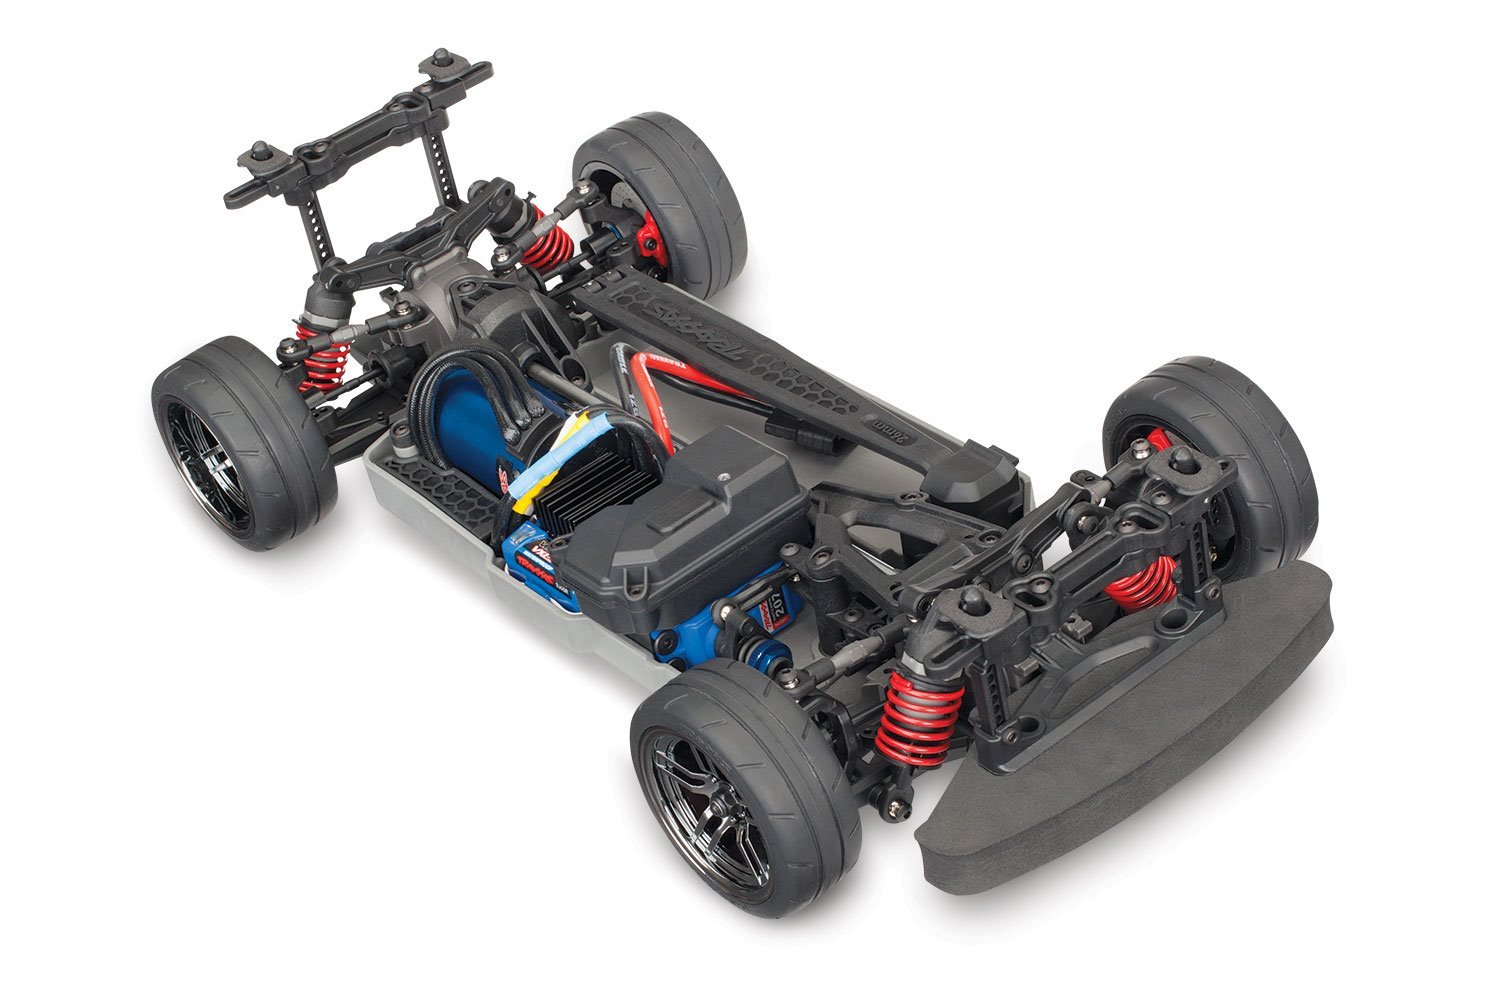 Traxxas 4-Tec 2.0 AWD Chassis with Velineon Power System